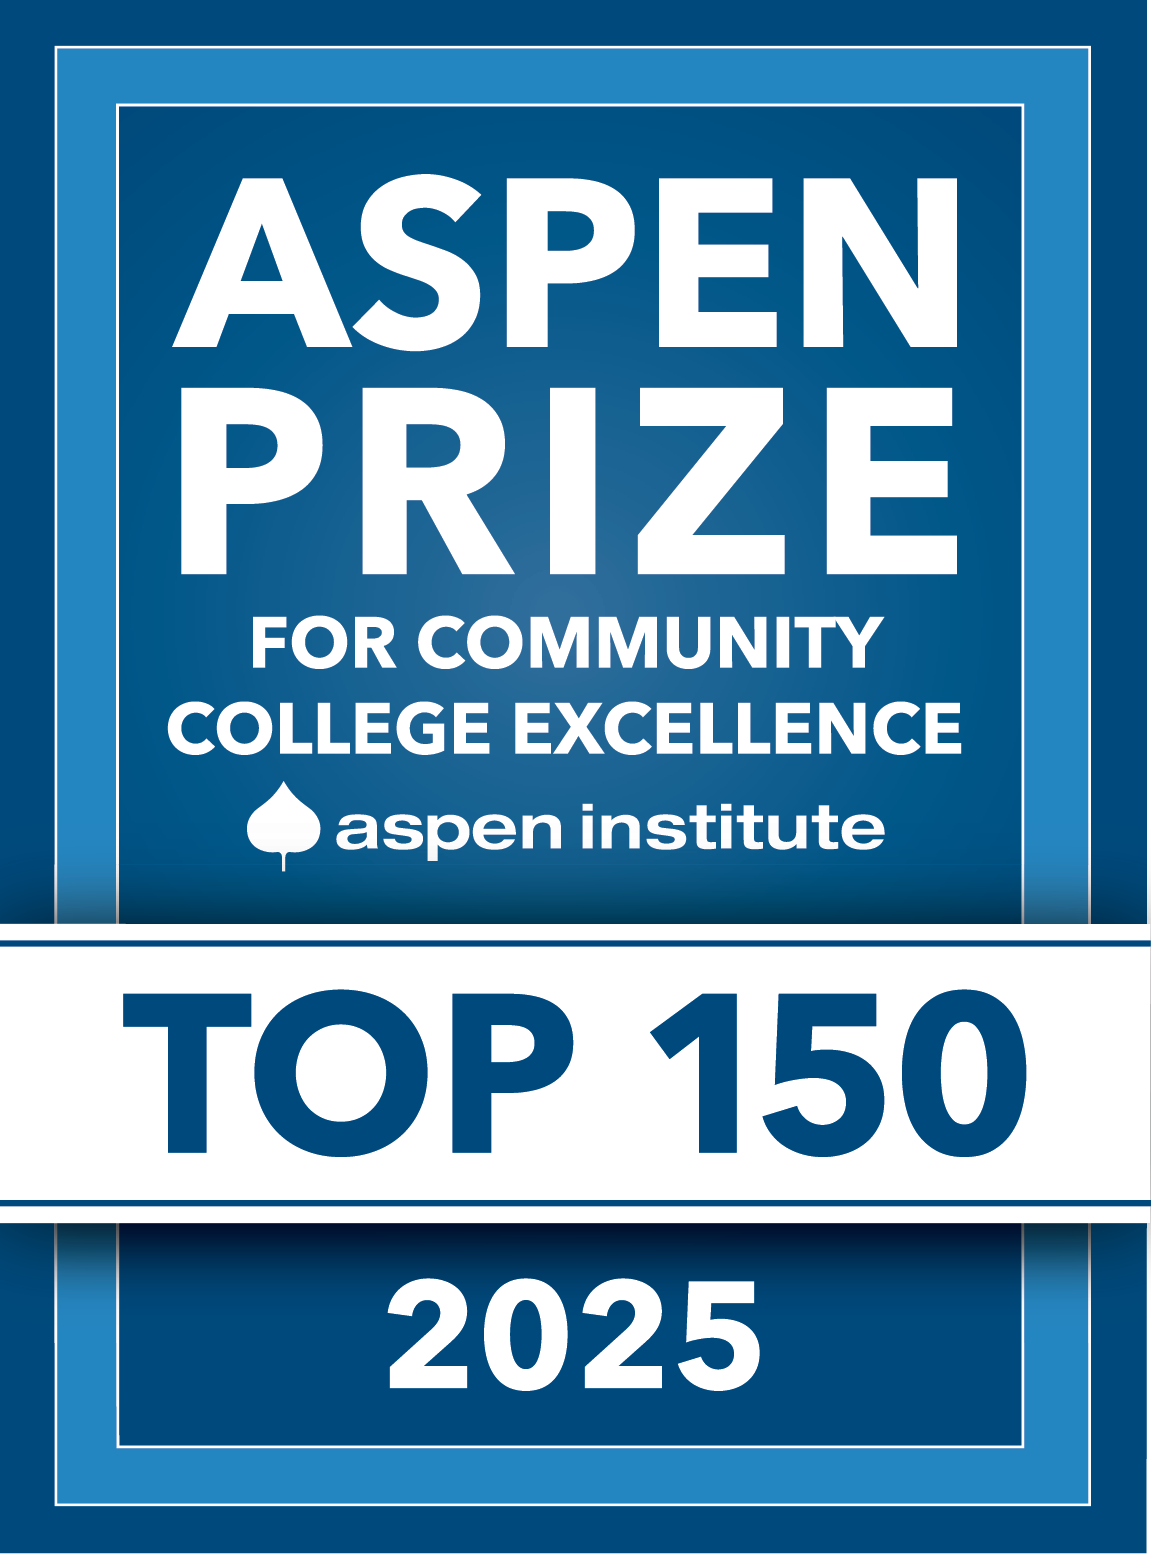 De Anza has again been named one of the nation's top 150 community colleges by the prestigious Aspen Institute College Excellence Program, which has invited De Anza to enter a $1 million prize competition for colleges with outstanding performance in teaching, learning, equity and other factors.